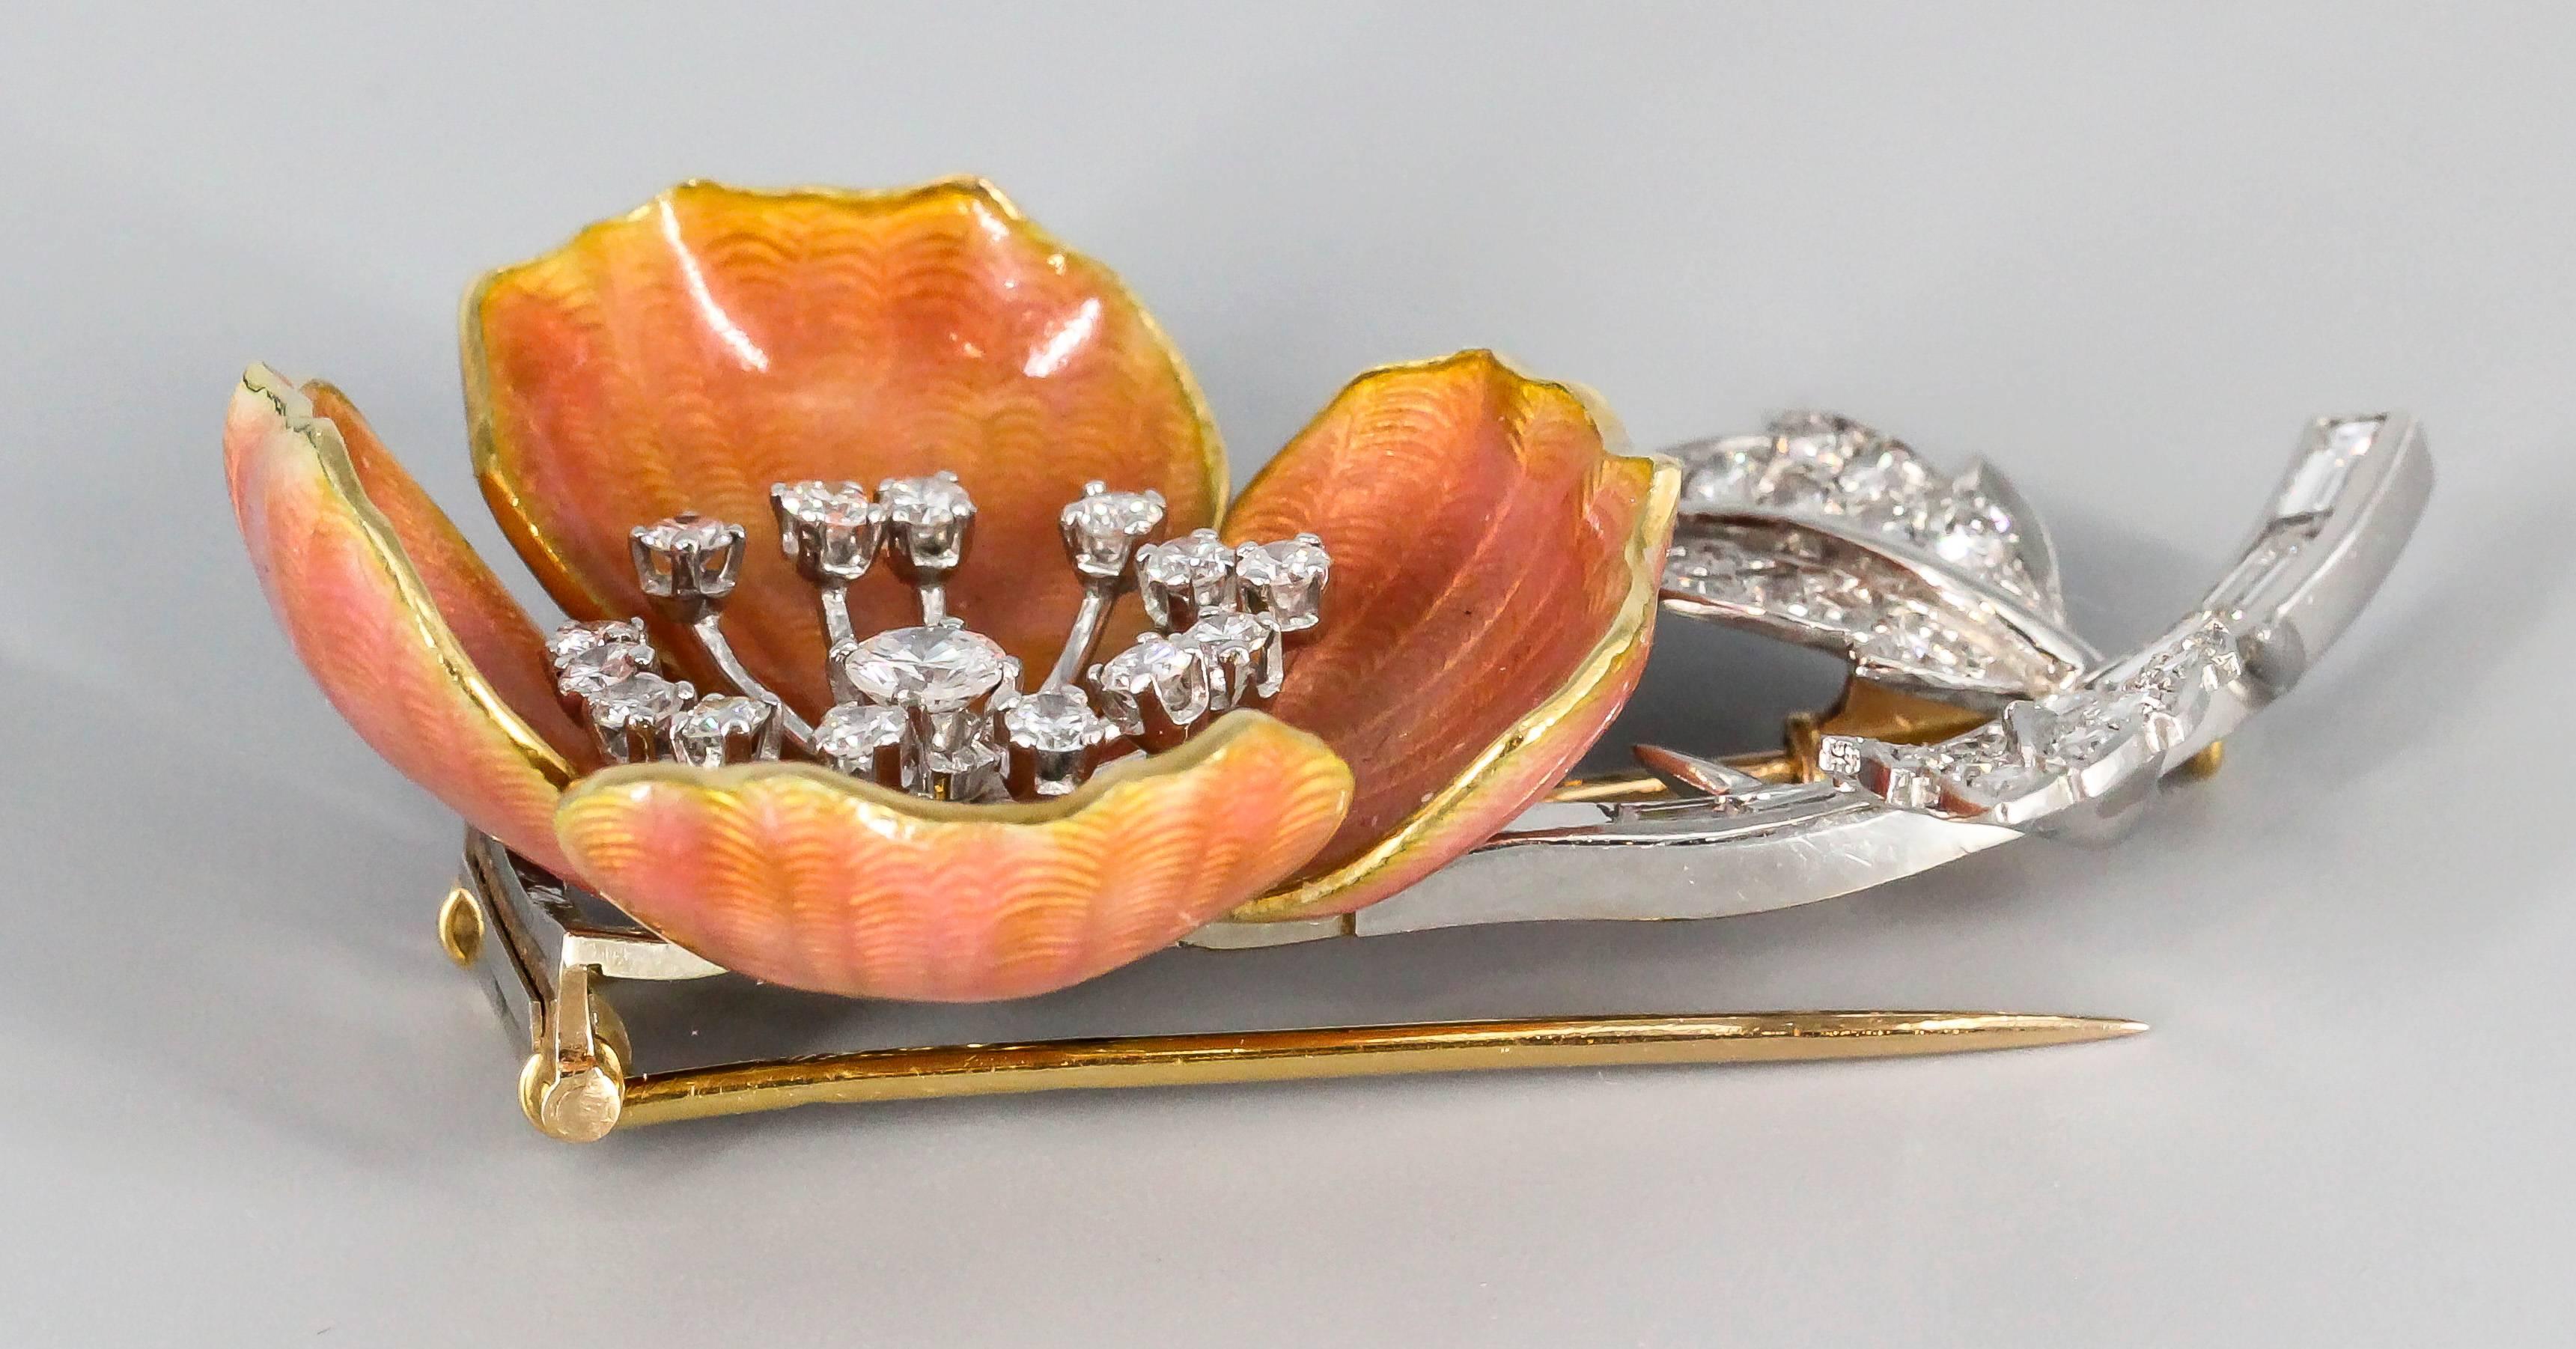 Vibrant diamond, enamel, 18K gold and platinum flower brooch by Boucheron. It features very high grade brilliant round cut and tapered baguette cut diamonds, approx. 3.0cts total weight. Also features peach colored guilloche enamel on the petals,